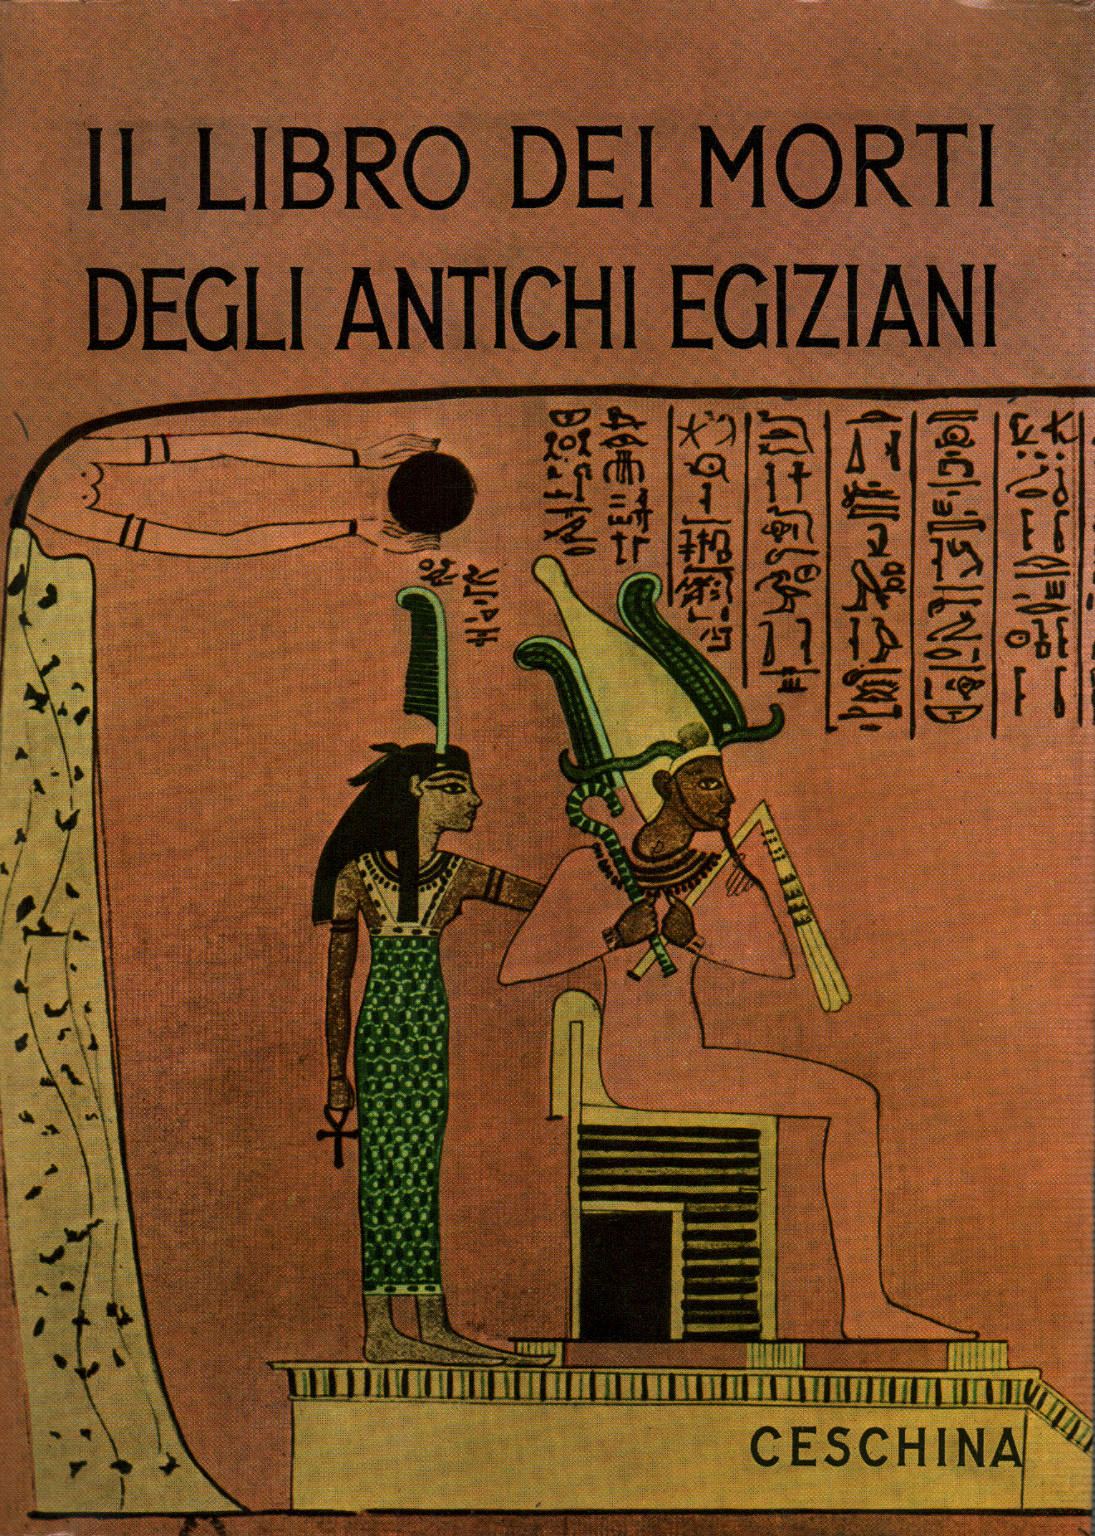 The Book of the Dead of the Ancient Egyptians